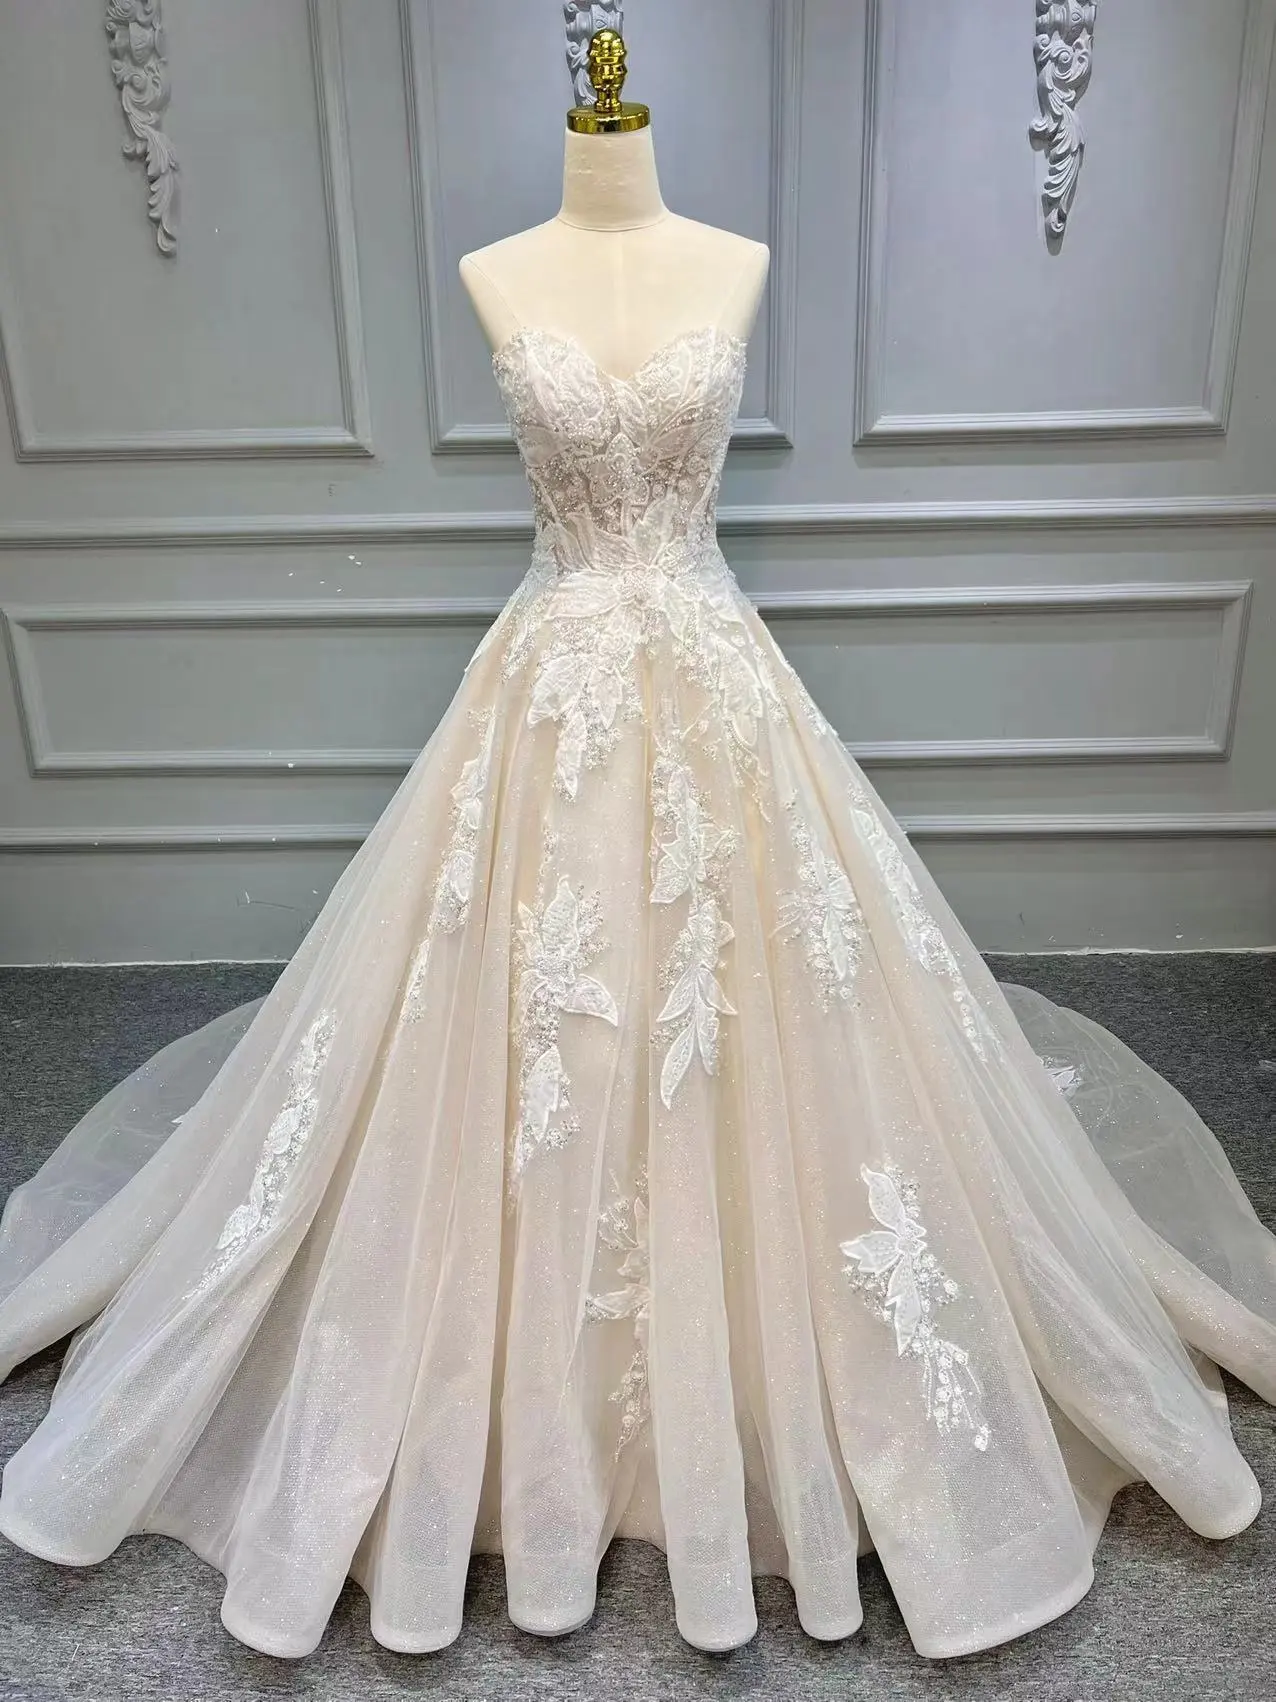 Three-dimensional embroidered lace wedding dress heart-shaped neckline bead trailing wedding dress